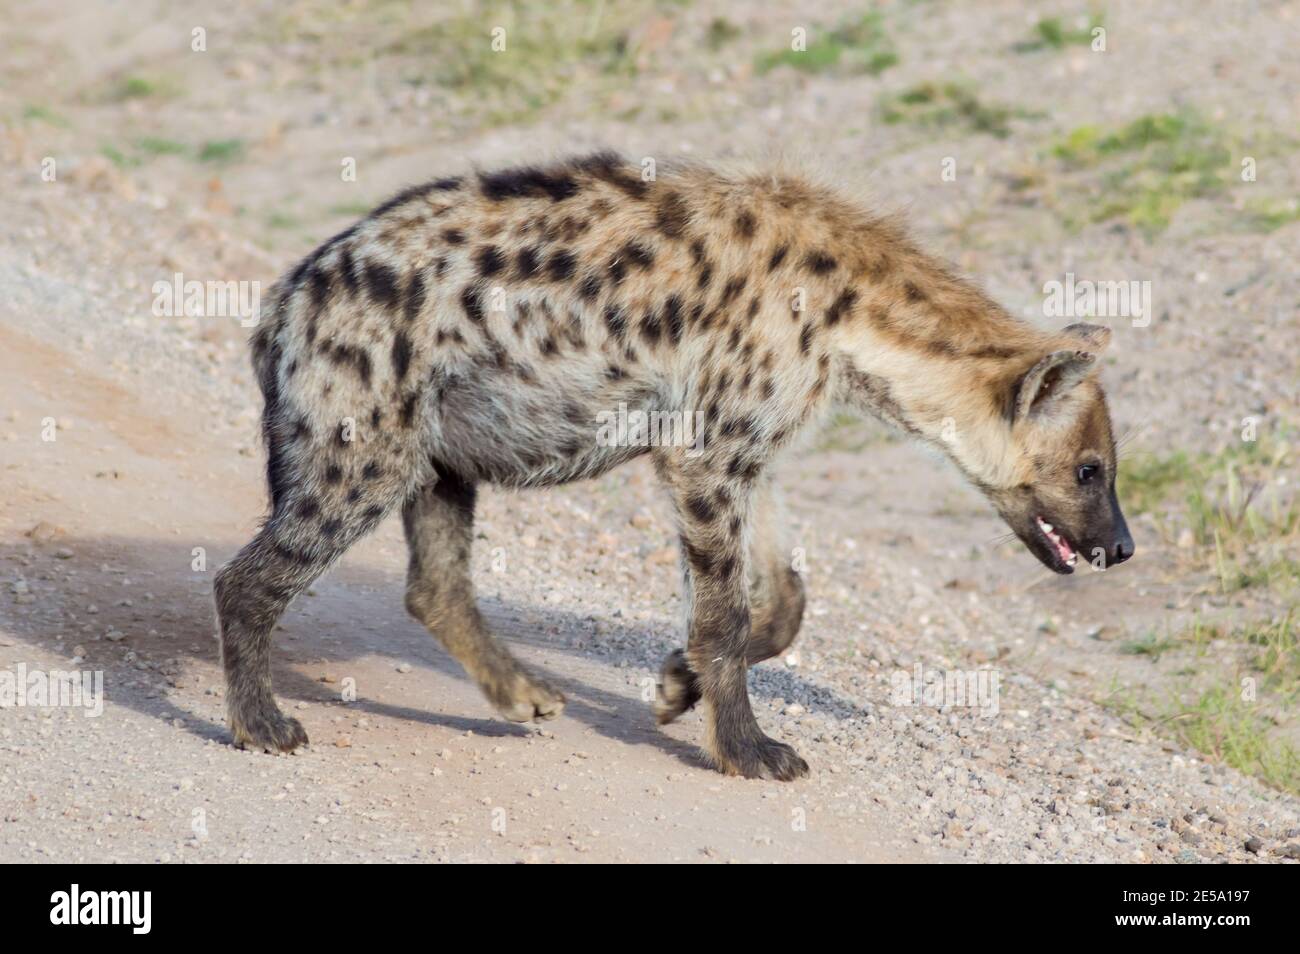 Short portrait of a spotted hyena (Crocuta crocuta) strolling curiously out of its den in Ambosseli National Park, Kenya. Stock Photo